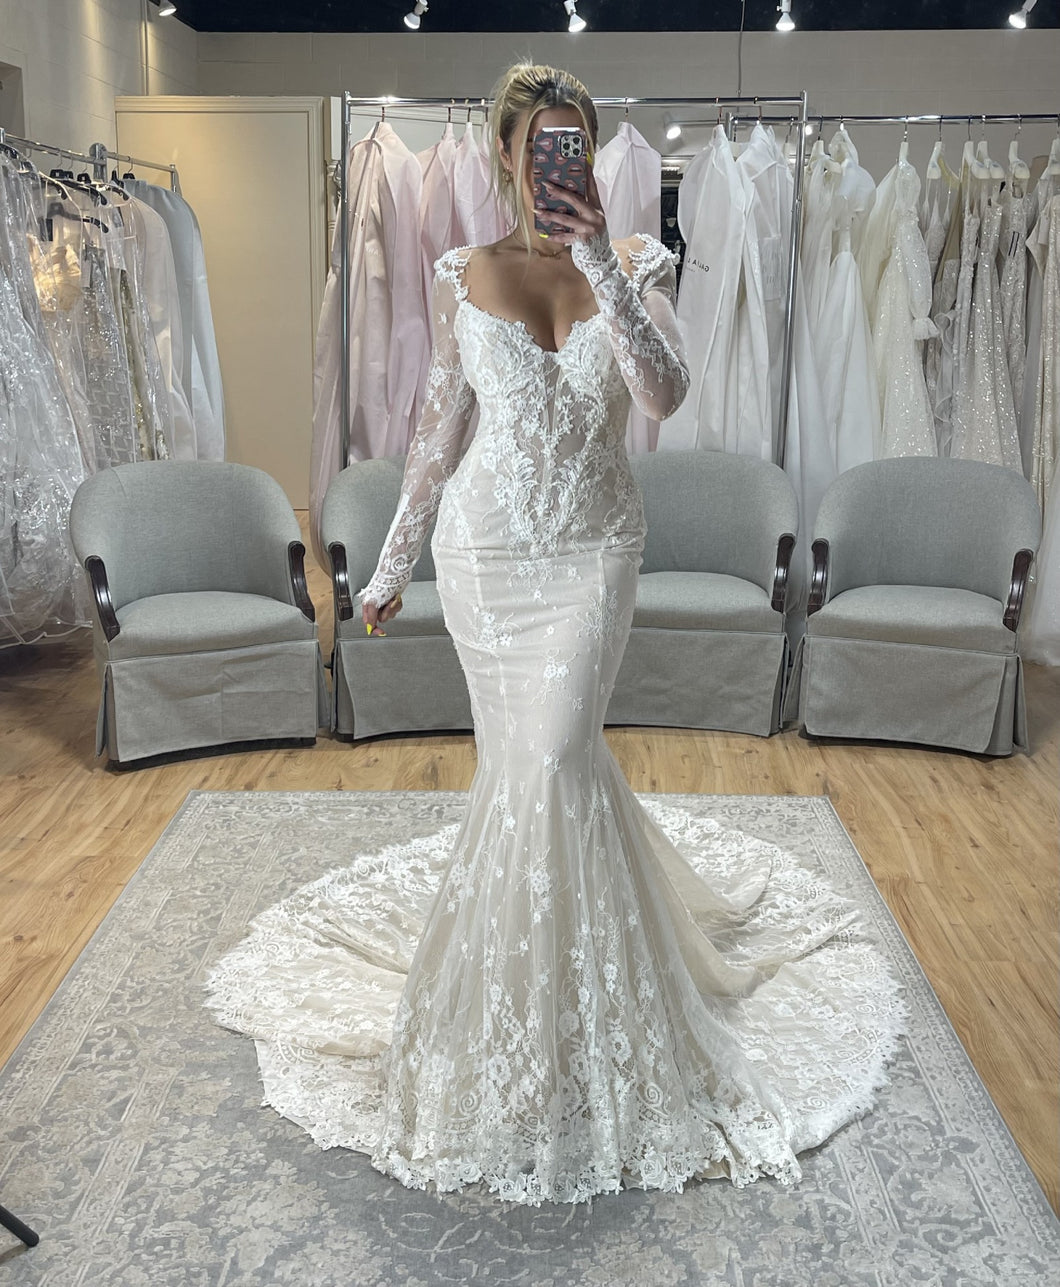 C2023-LLS41 - backless long sleeve beaded lace wedding gown with open bust line